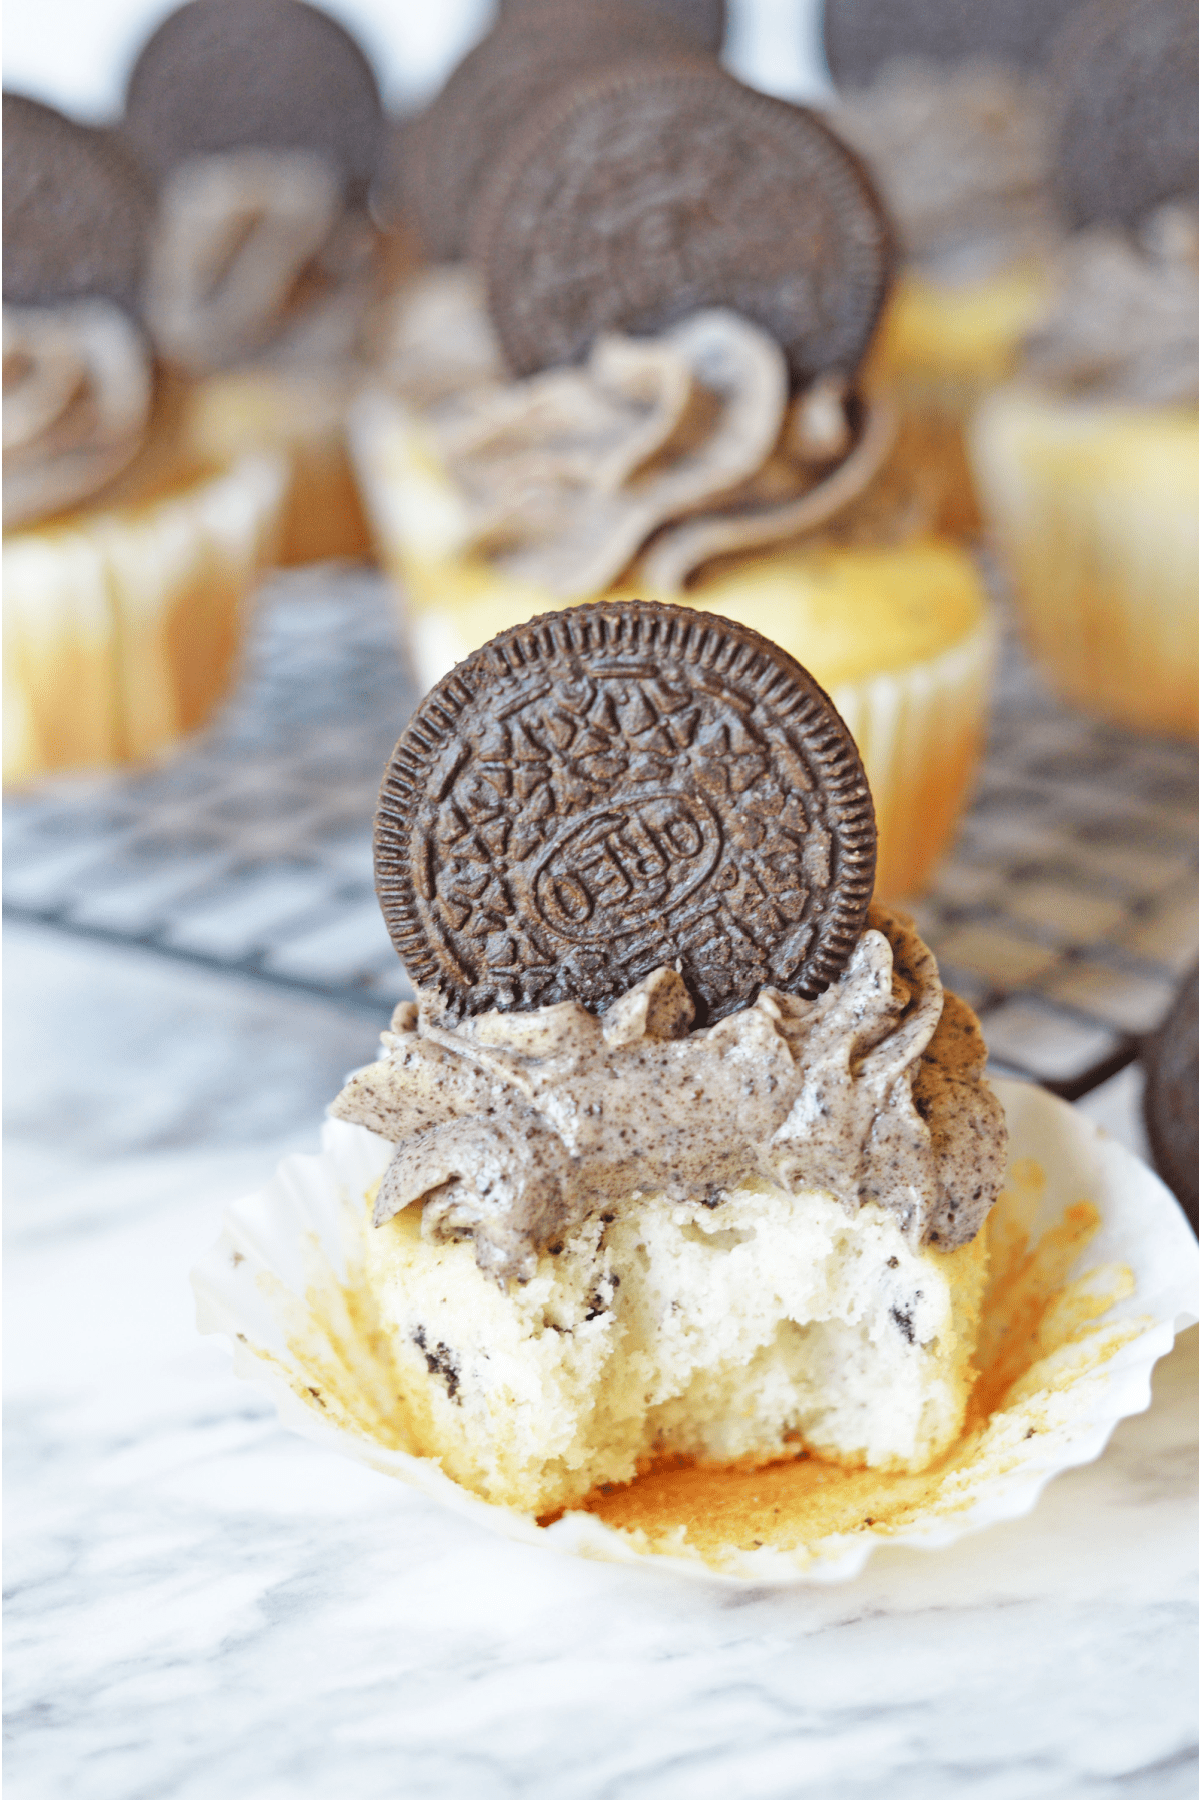 Oreo cupcake with a bite out